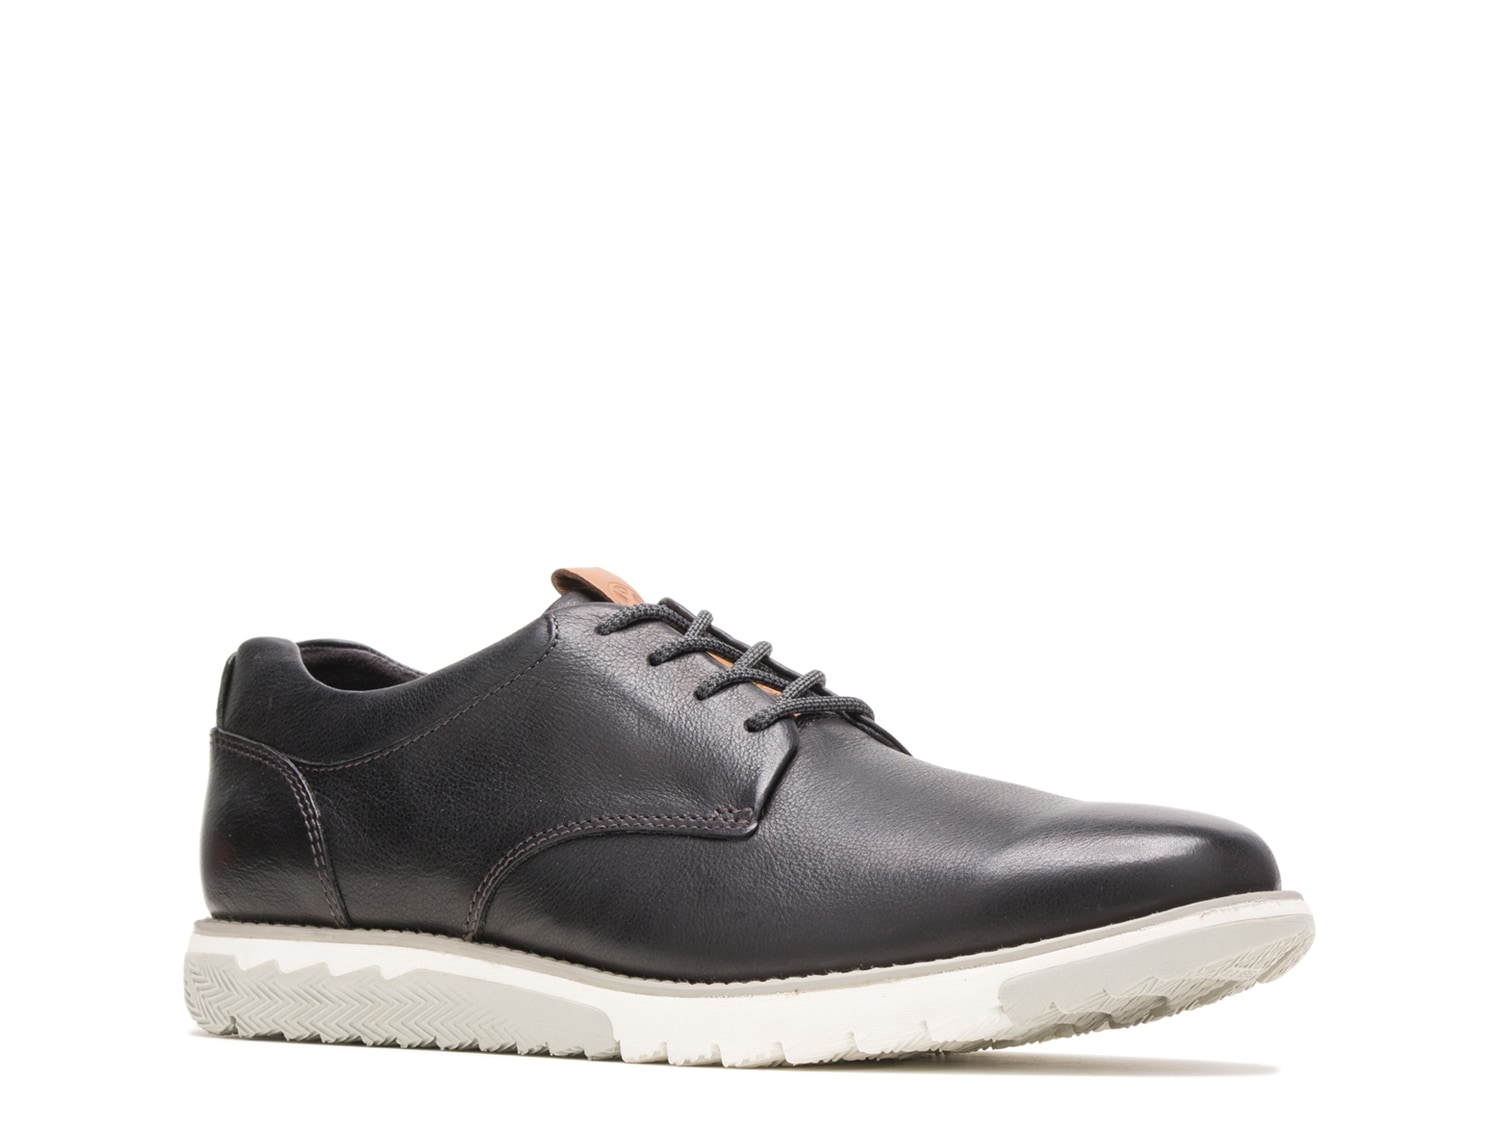 Hush Puppies Expert Oxford - Free Shipping | DSW